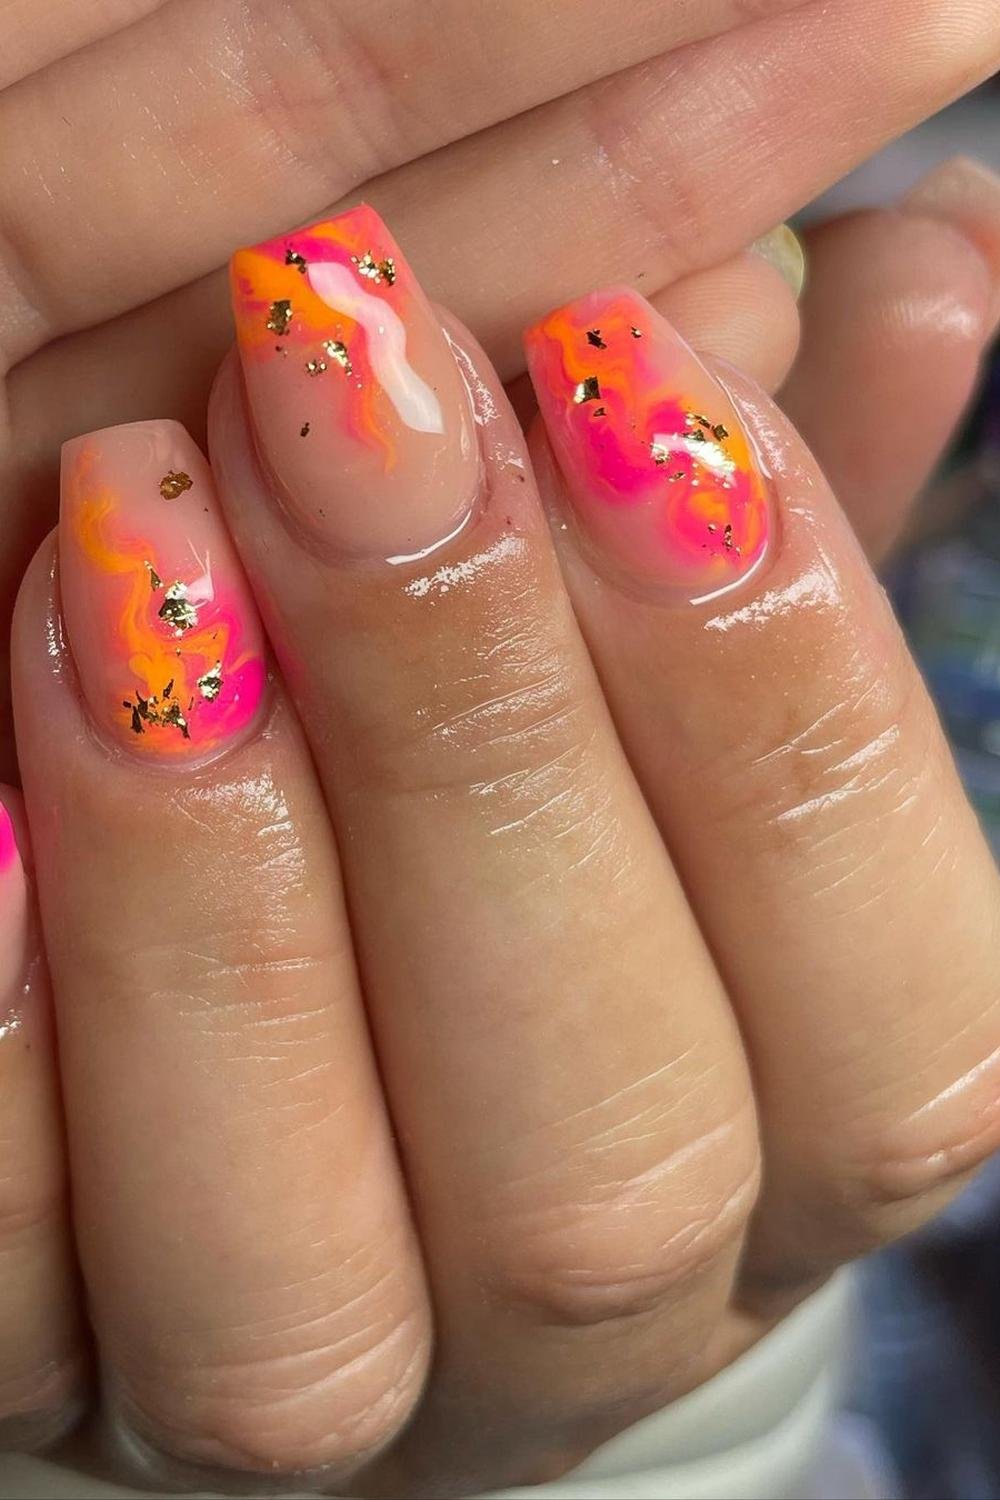 29 - Picture of Pink and Orange Nails